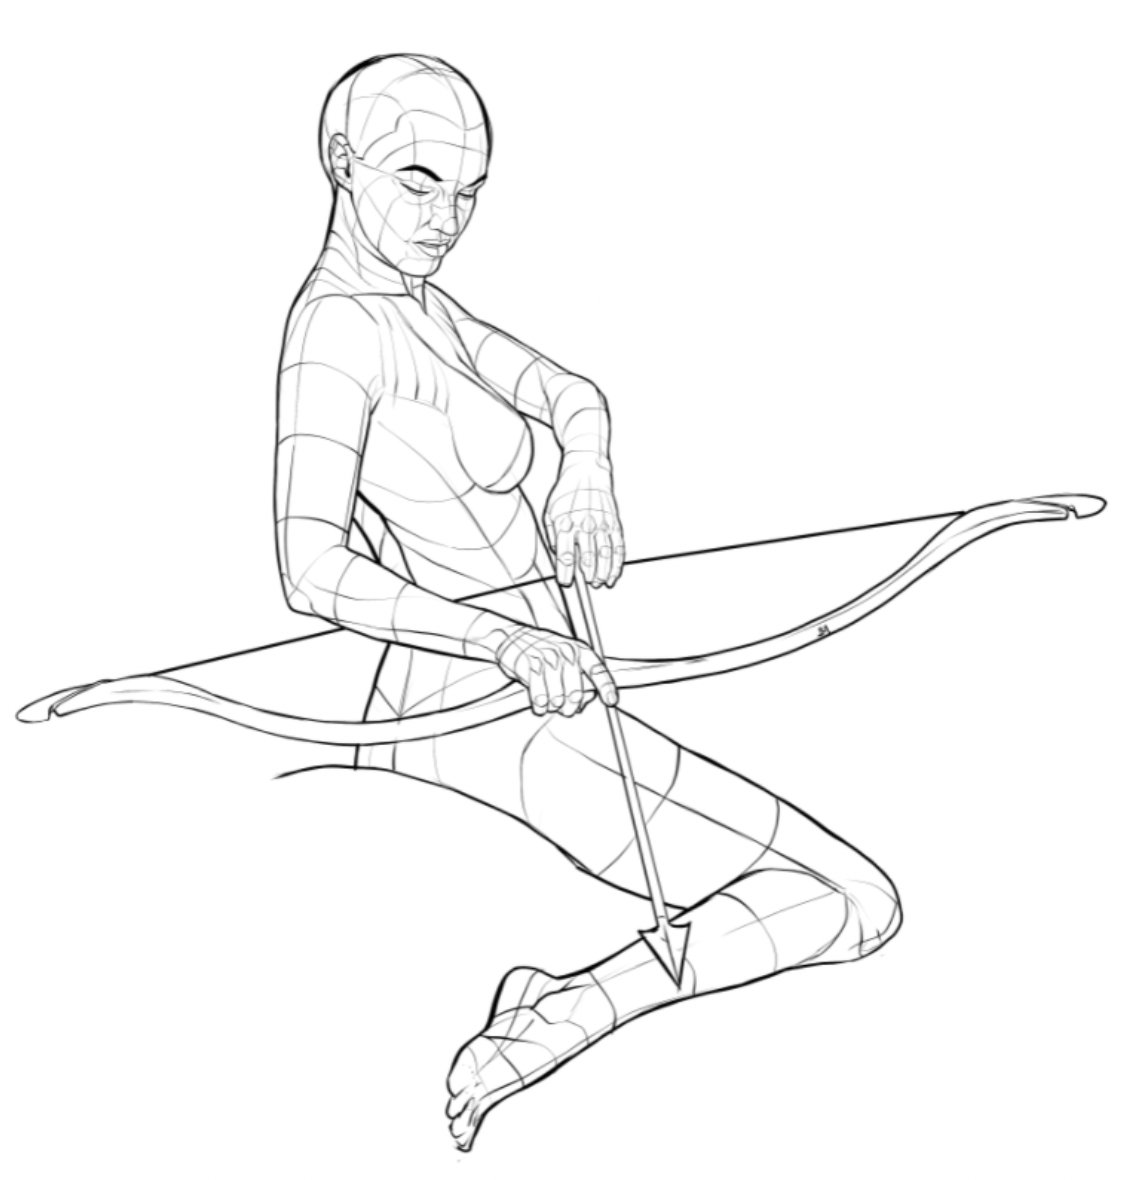 Pose Reference  New Pose  New Ebook Formats I just converted the